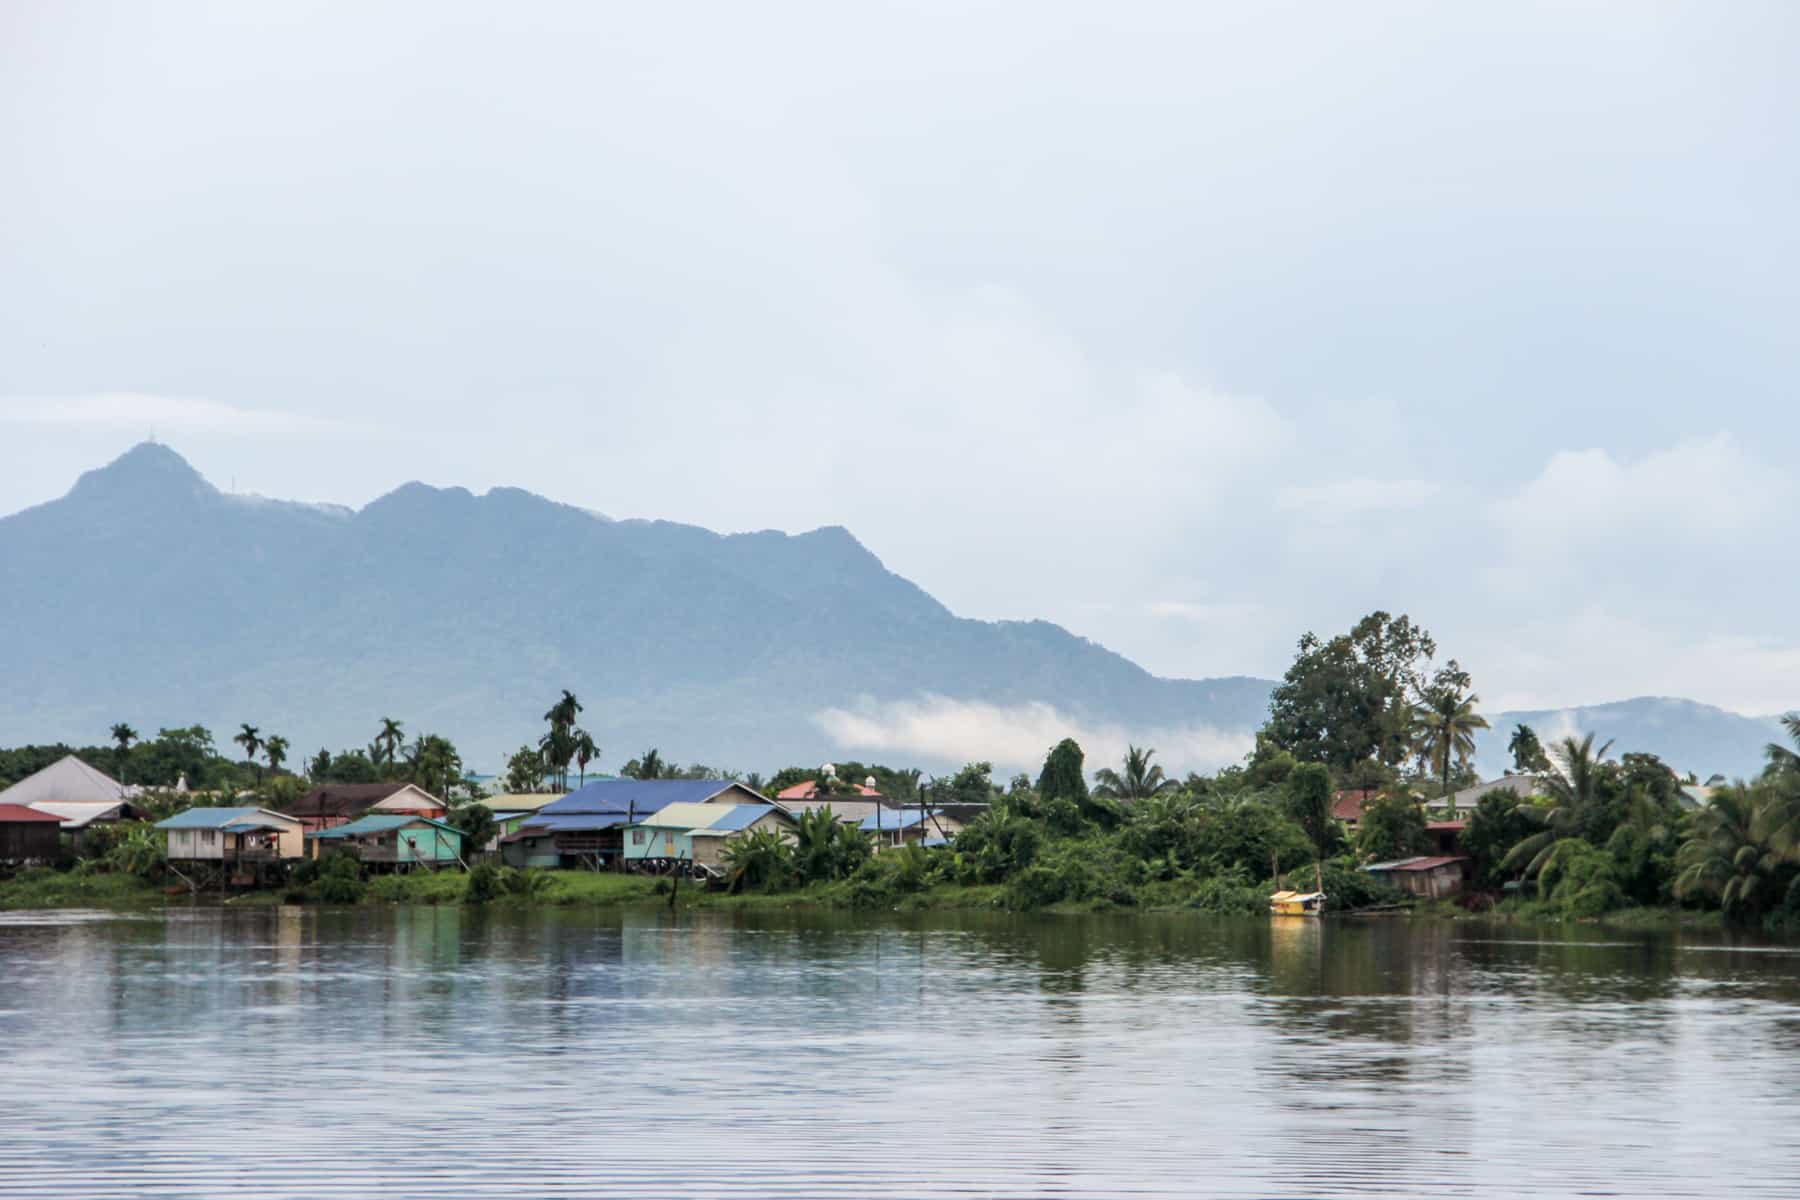 A row of multicoloured wooden houses line the Sarawak River in Kuching, to a background of mountains and lush greenery